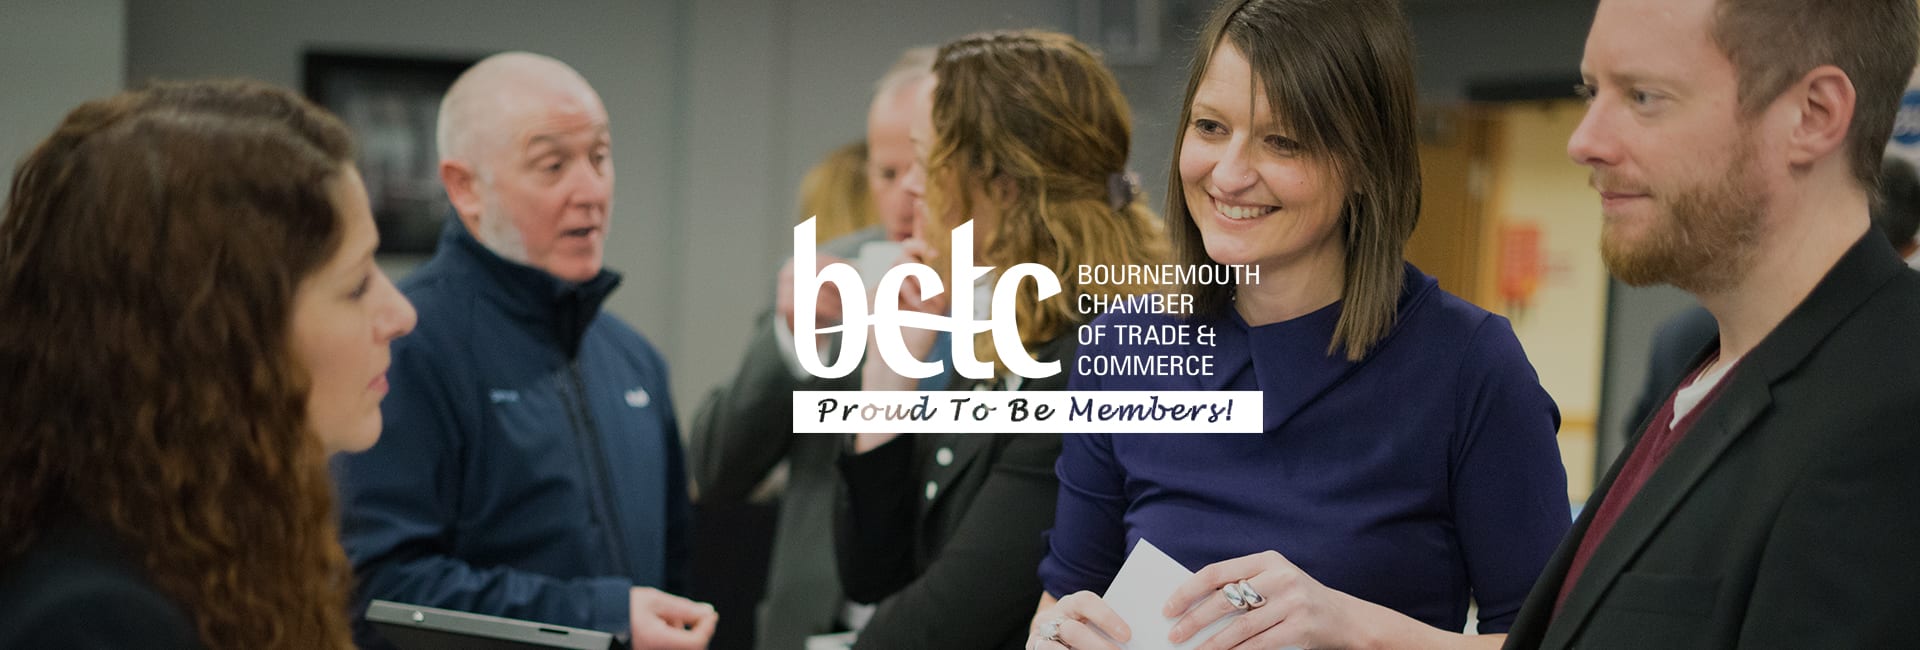 Excited to join the Bournemouth Chamber!